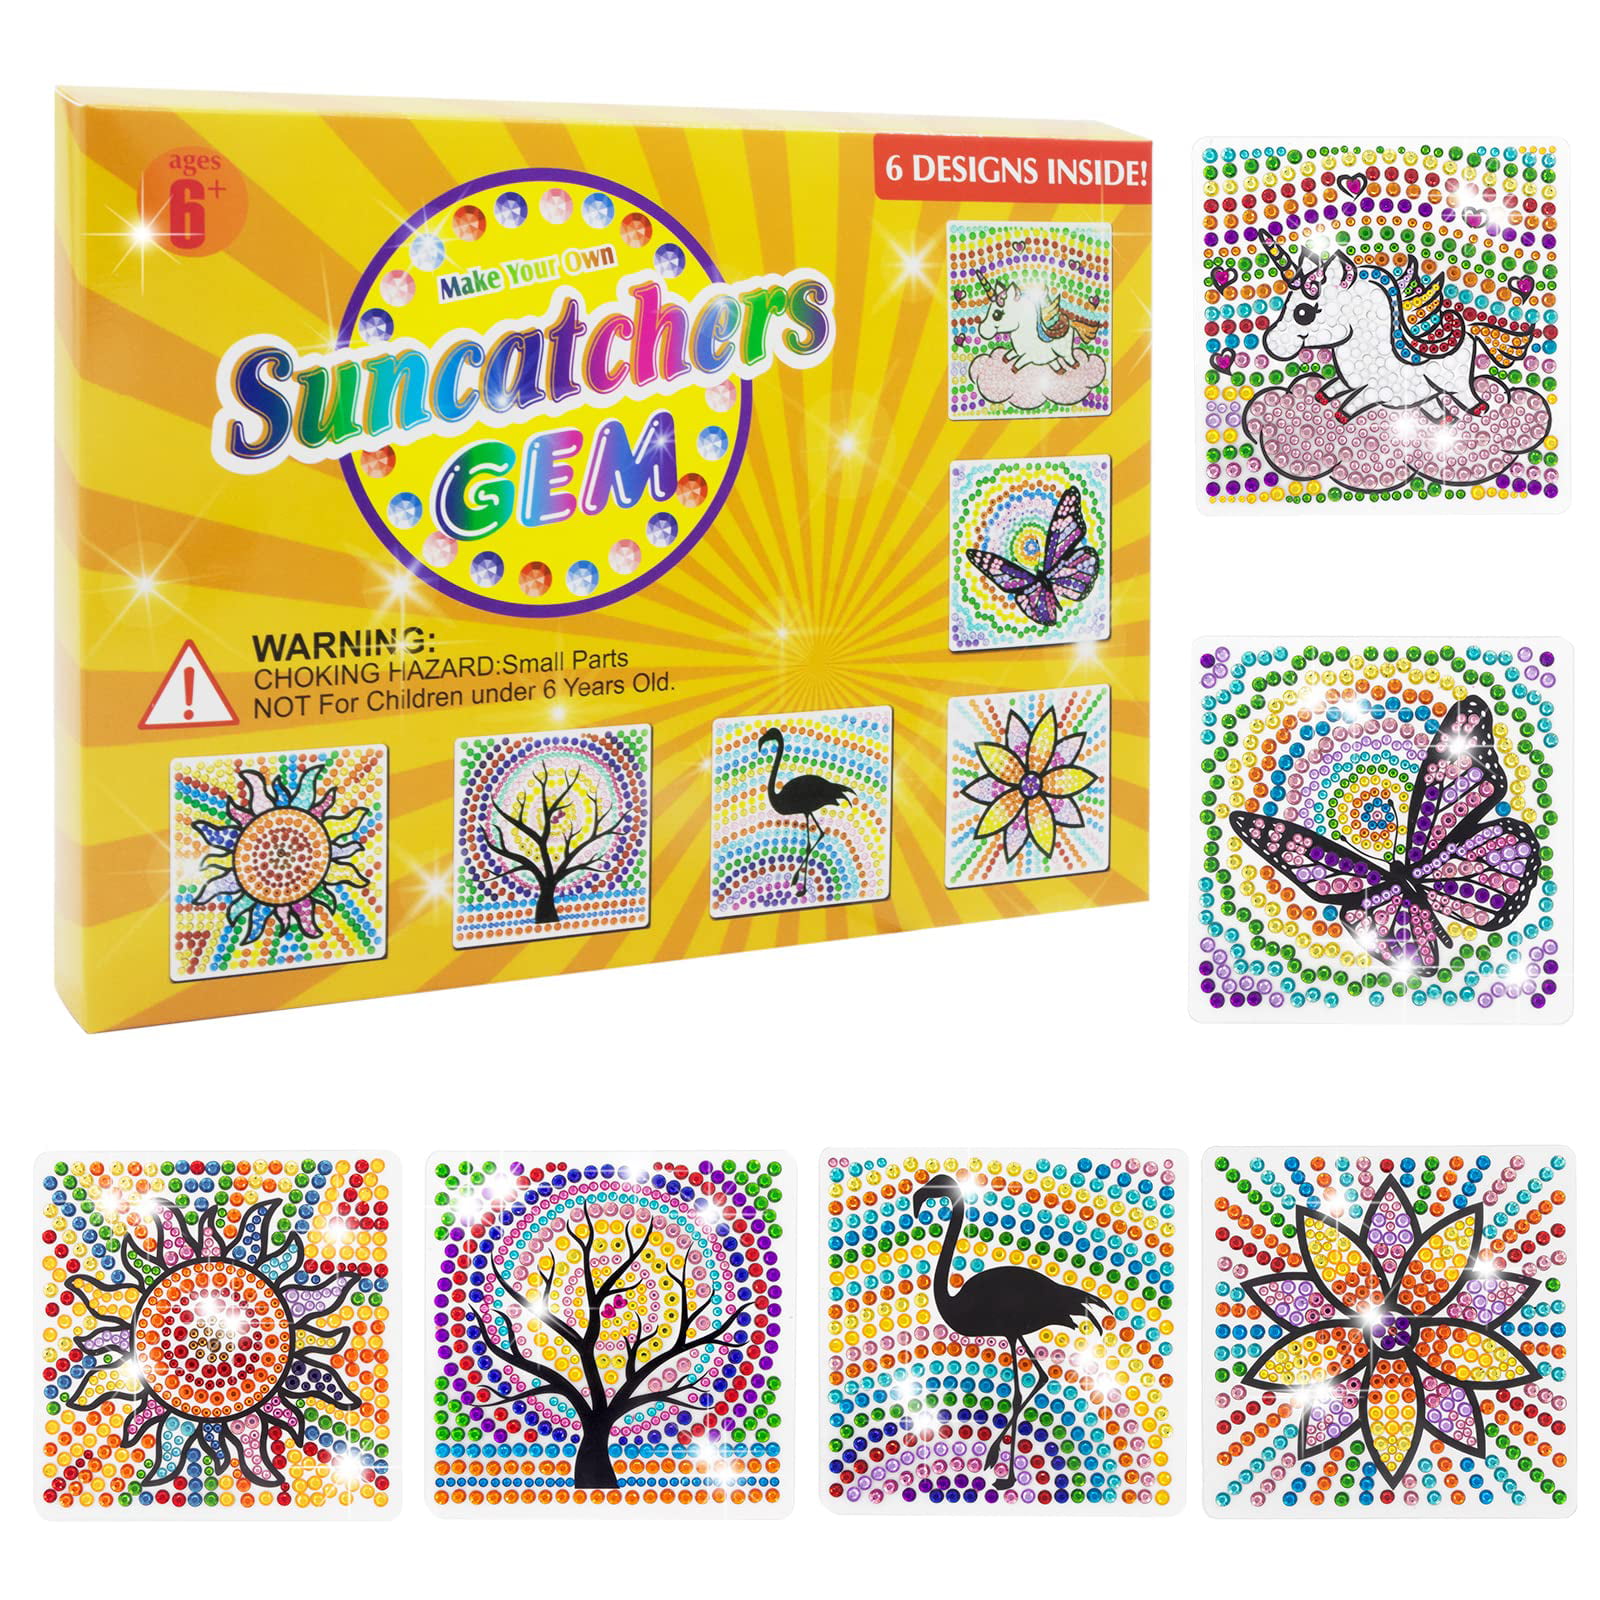 Purple Ladybug SUNGEMMERS Diamond Window Art Craft Kits for Kids 8-12 - Fun for Girls Ages 8-12, Spring Crafts for Kids Ages 8-12 - Great 6